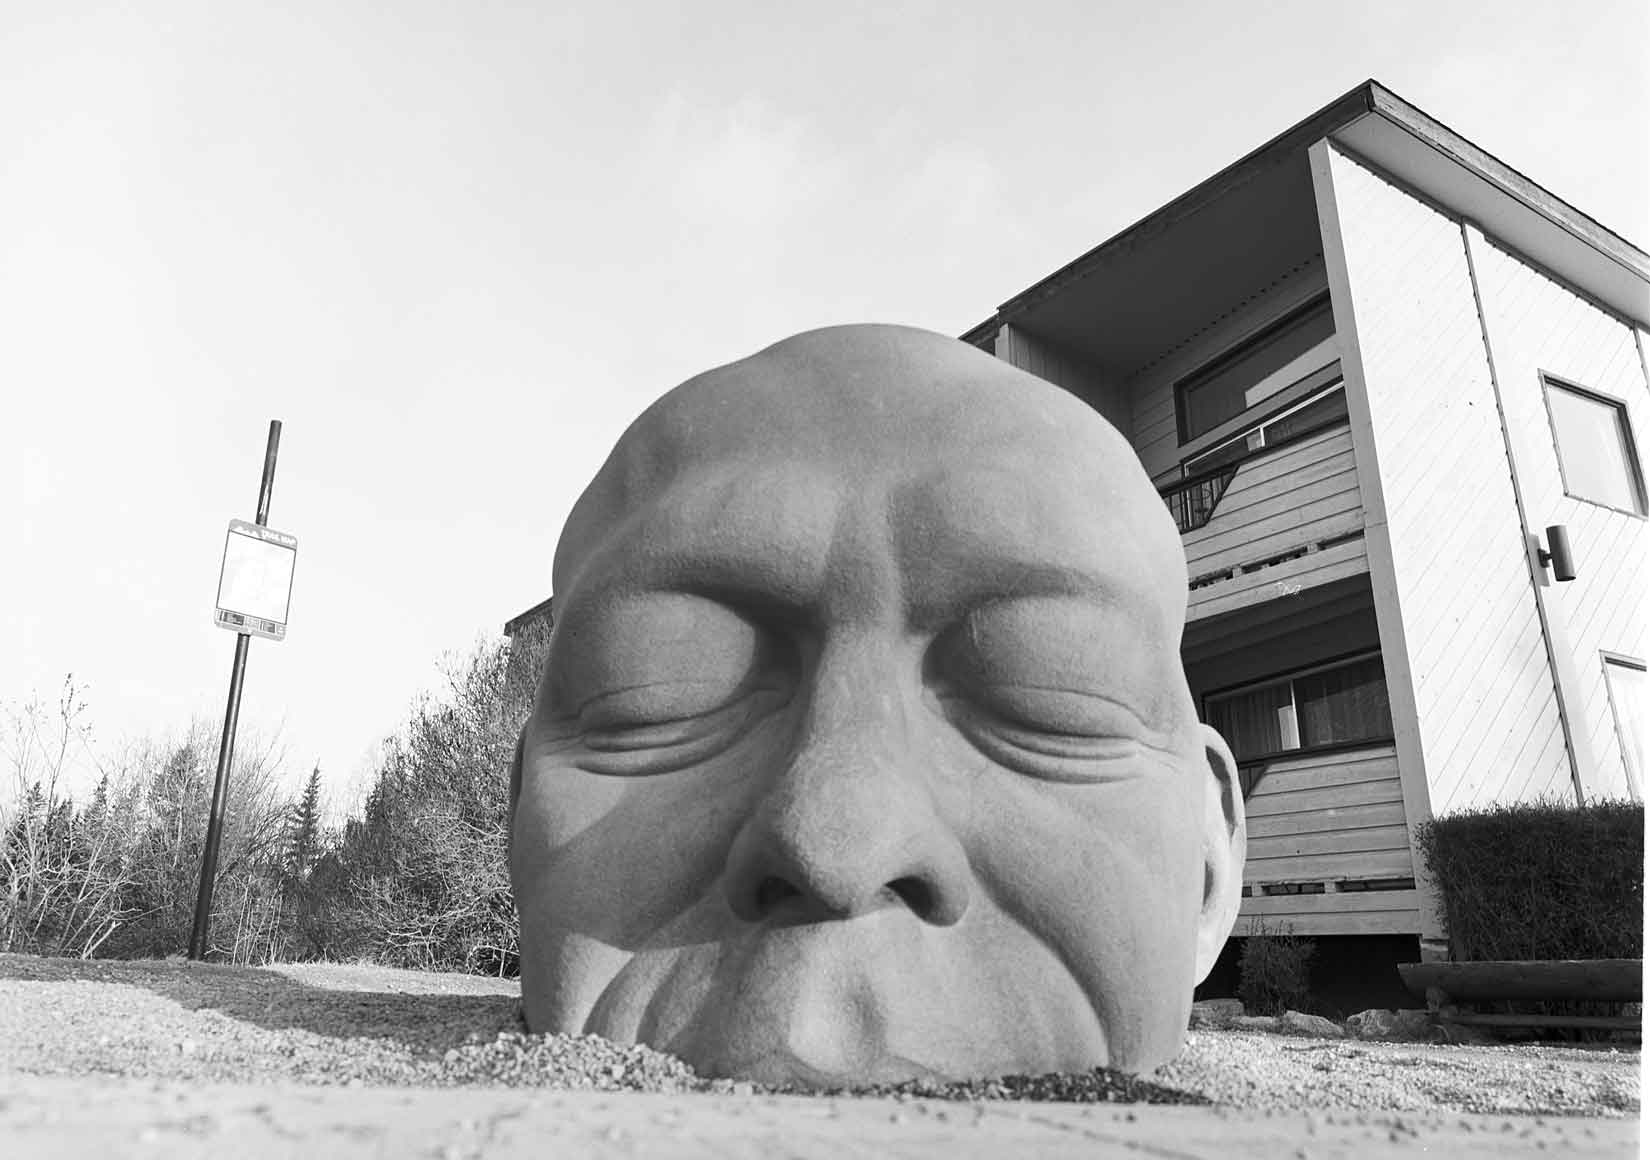 The Big Head statue downtown Canmore. Photo by Damian Lamartine